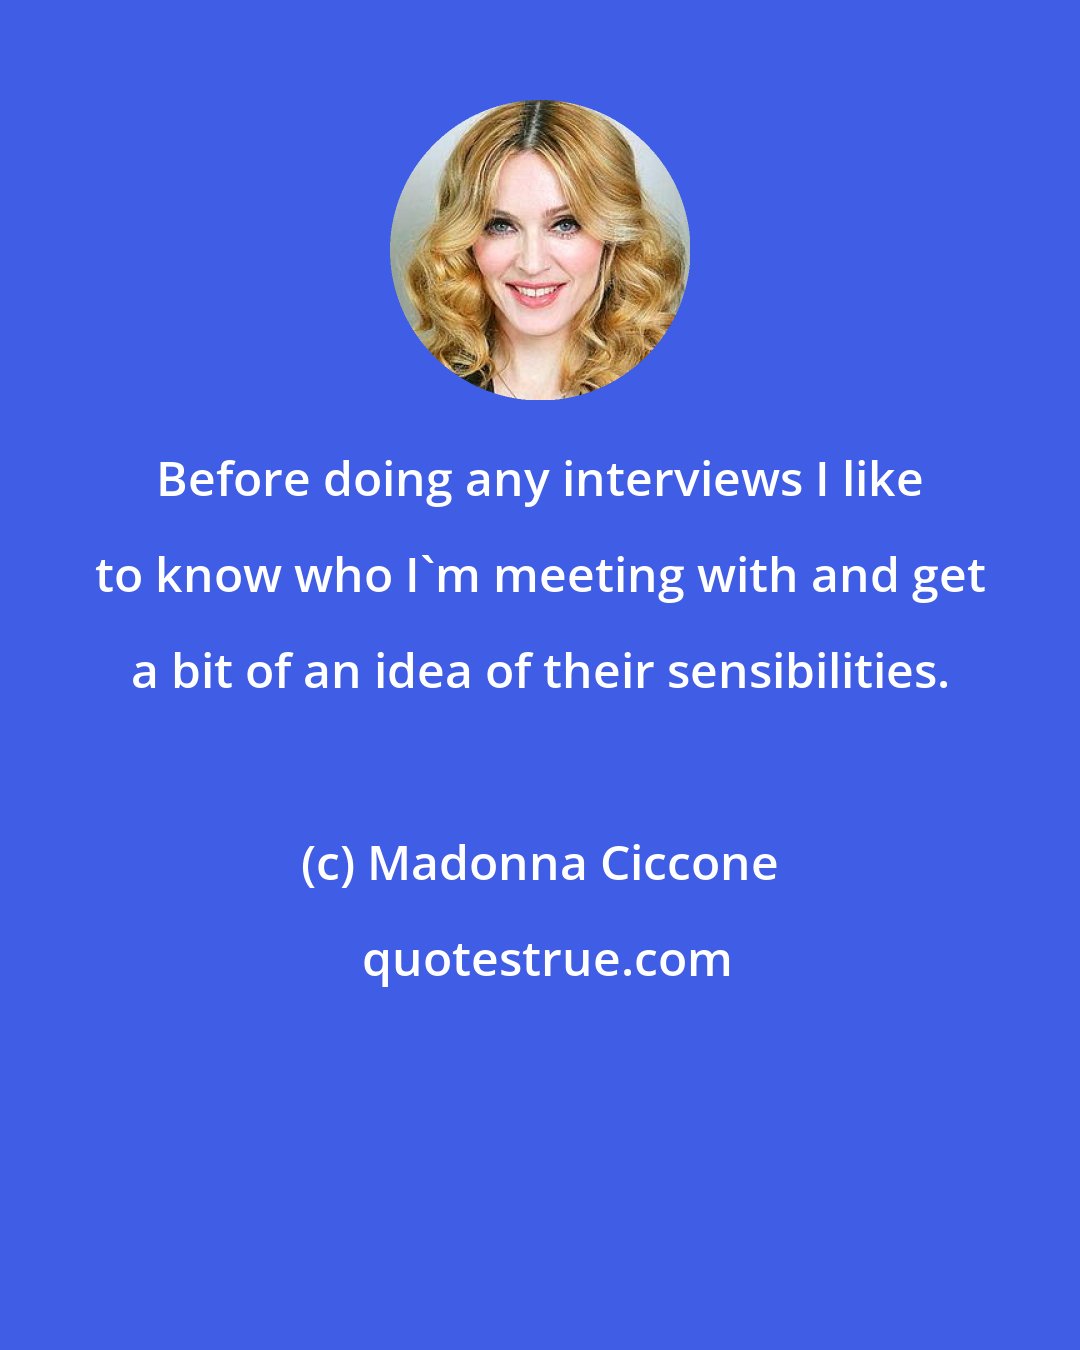 Madonna Ciccone: Before doing any interviews I like to know who I'm meeting with and get a bit of an idea of their sensibilities.